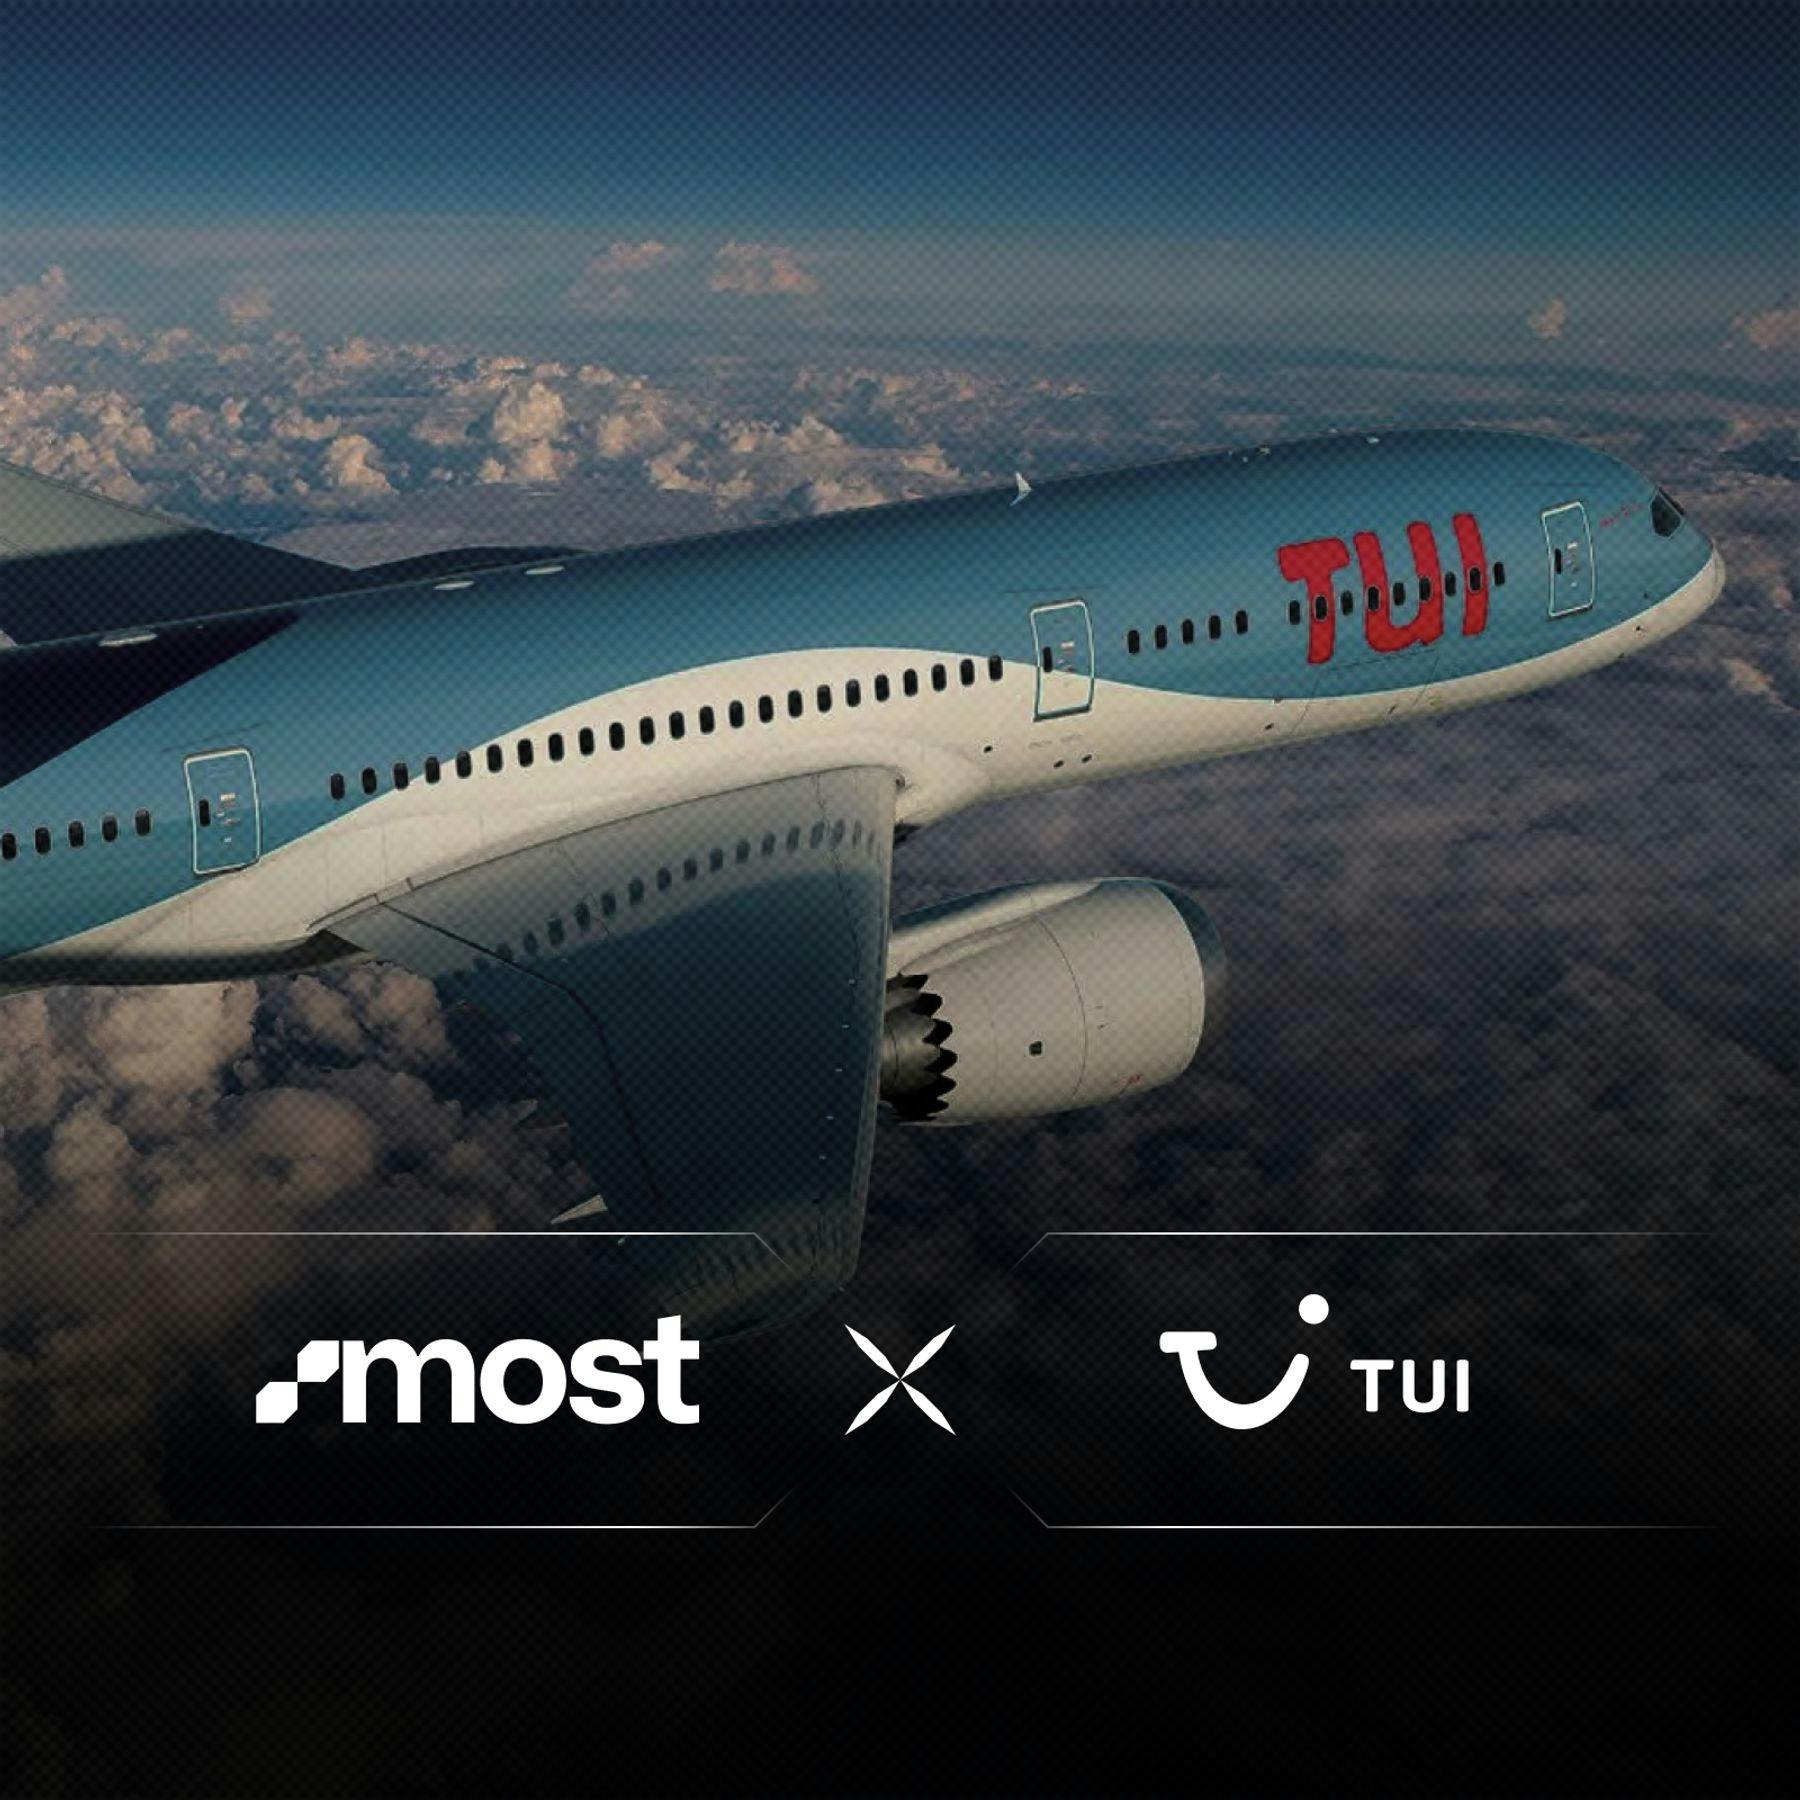 TUI selects MOST to support sales, inventory management and payment processing onboard for U.S. operations.